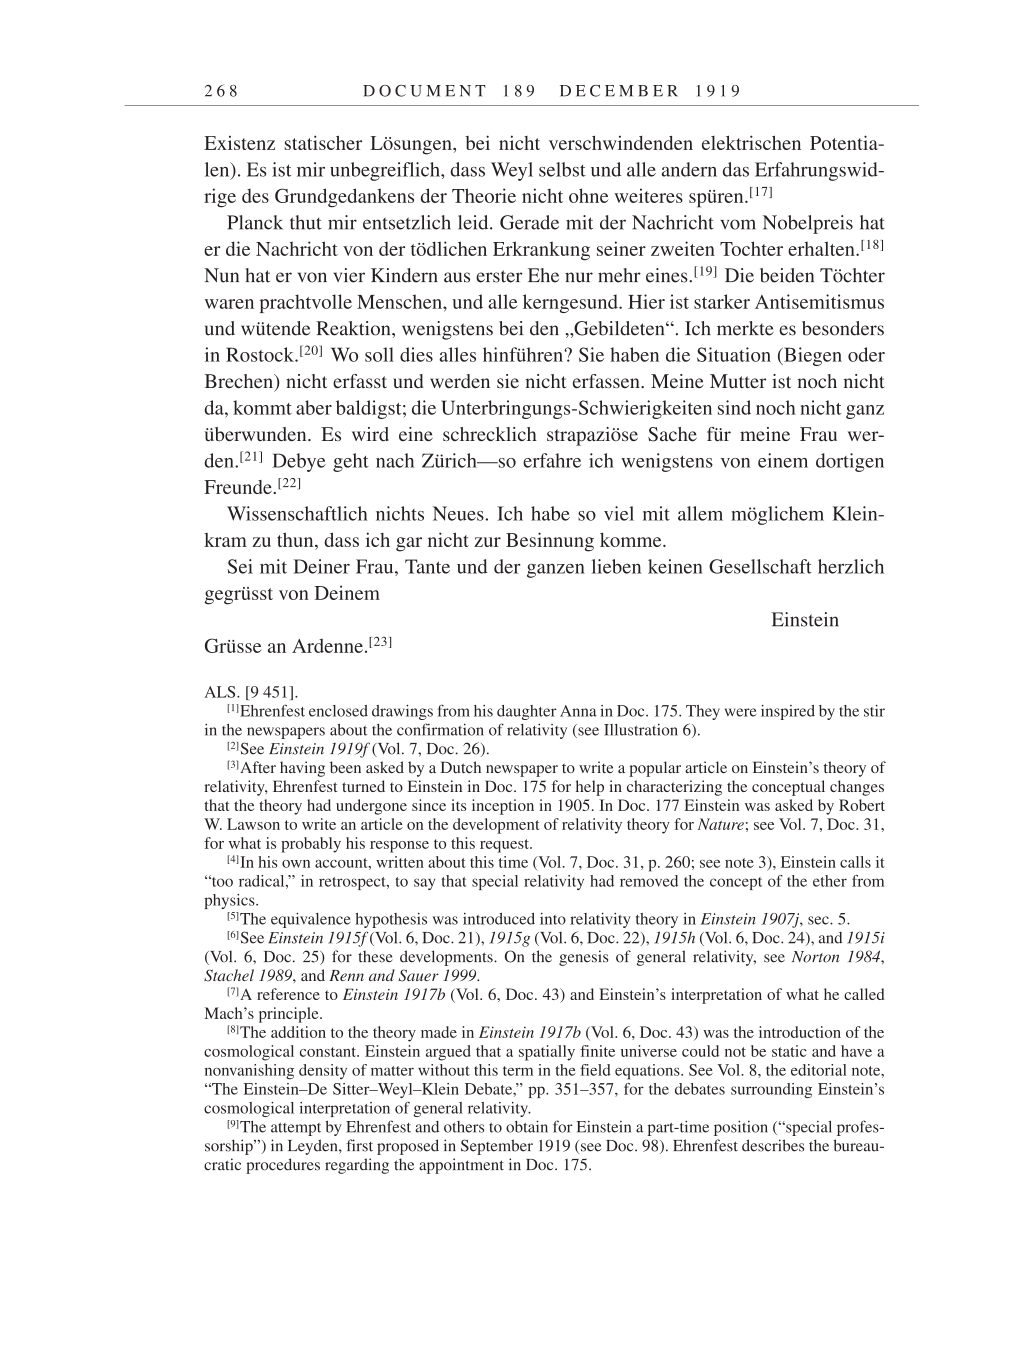 Volume 9: The Berlin Years: Correspondence January 1919-April 1920 page 268